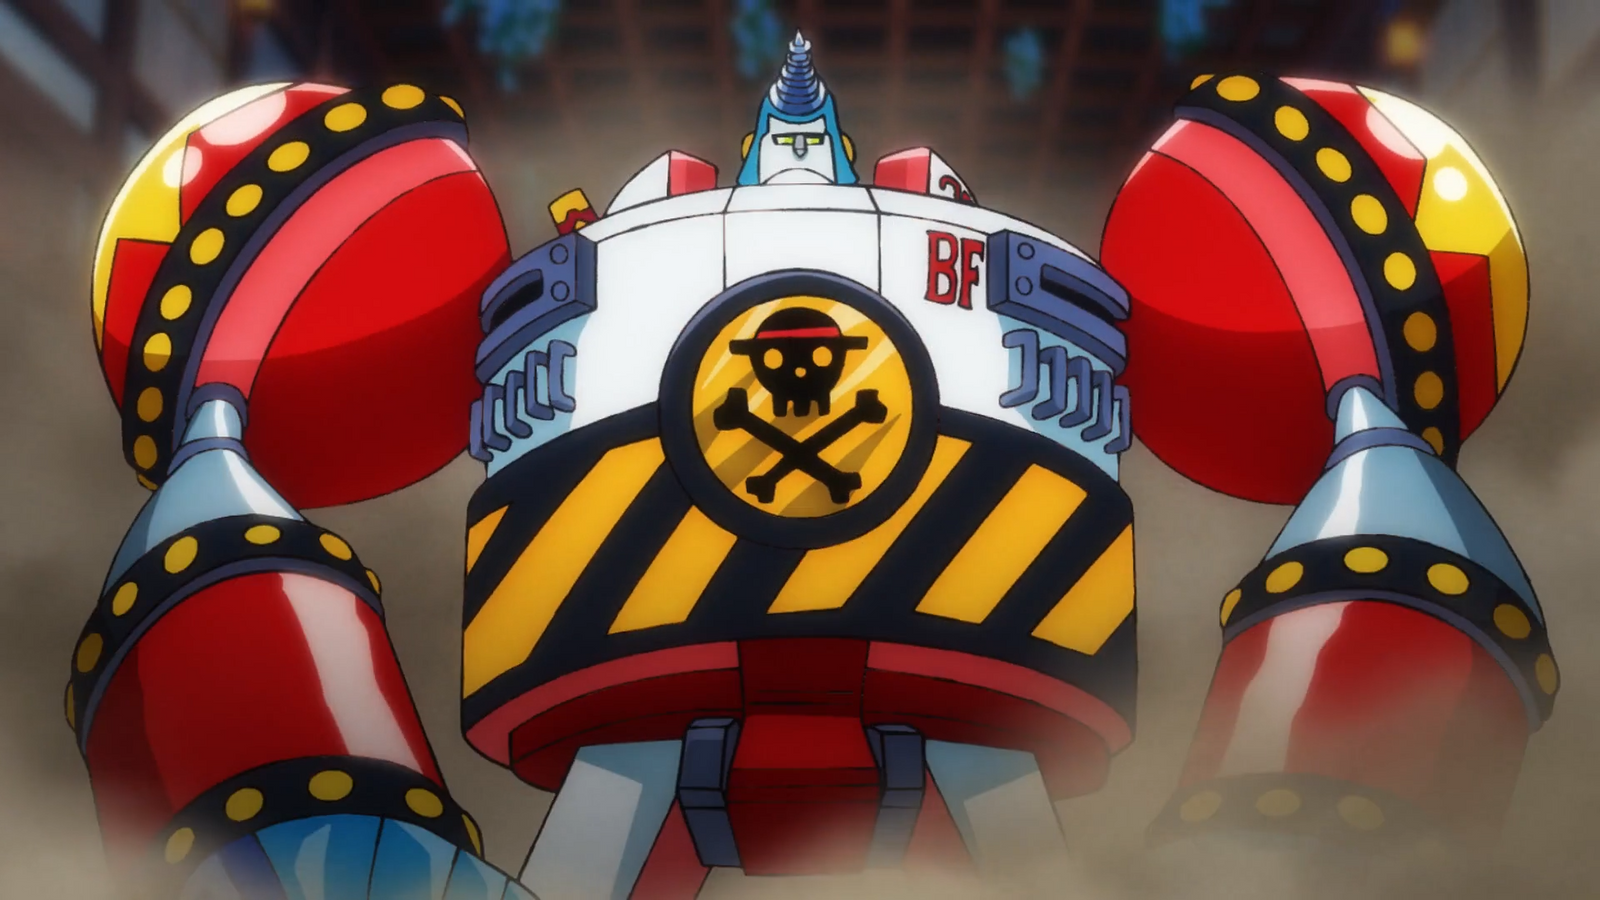 Franky inside the General Franky robot in the Wano arc of One Piece.